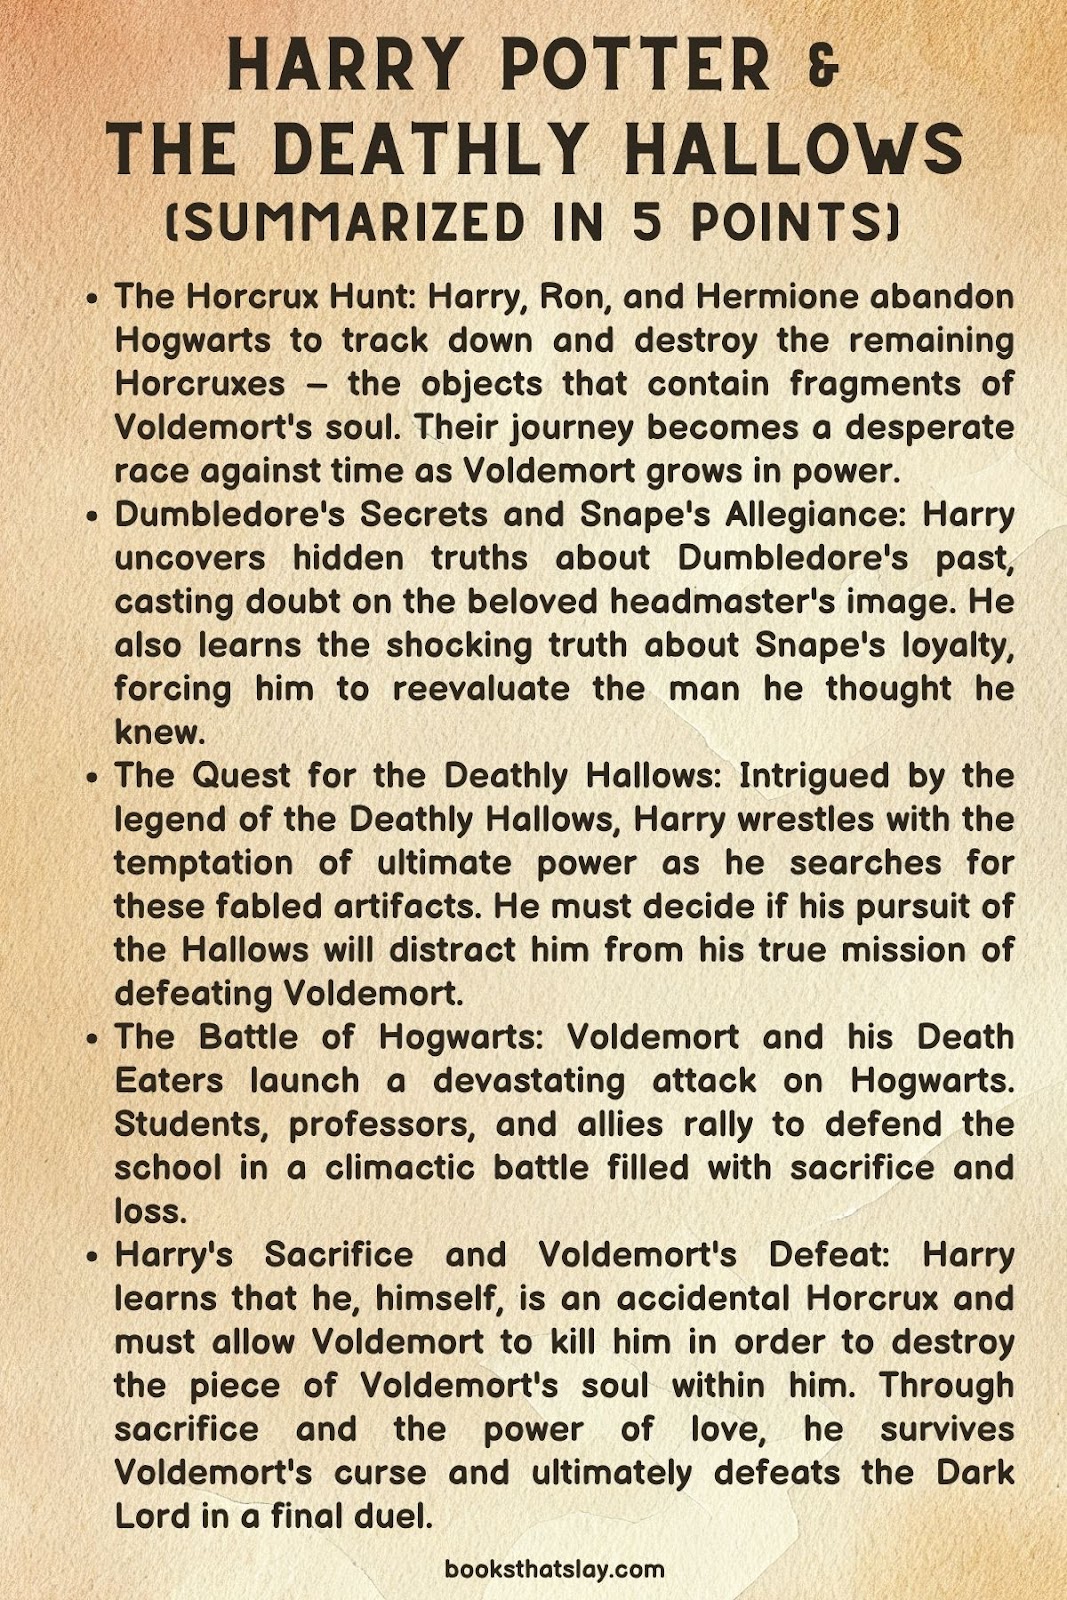 Harry Potter and the Deathly Hallows Summary, Characters and Themes